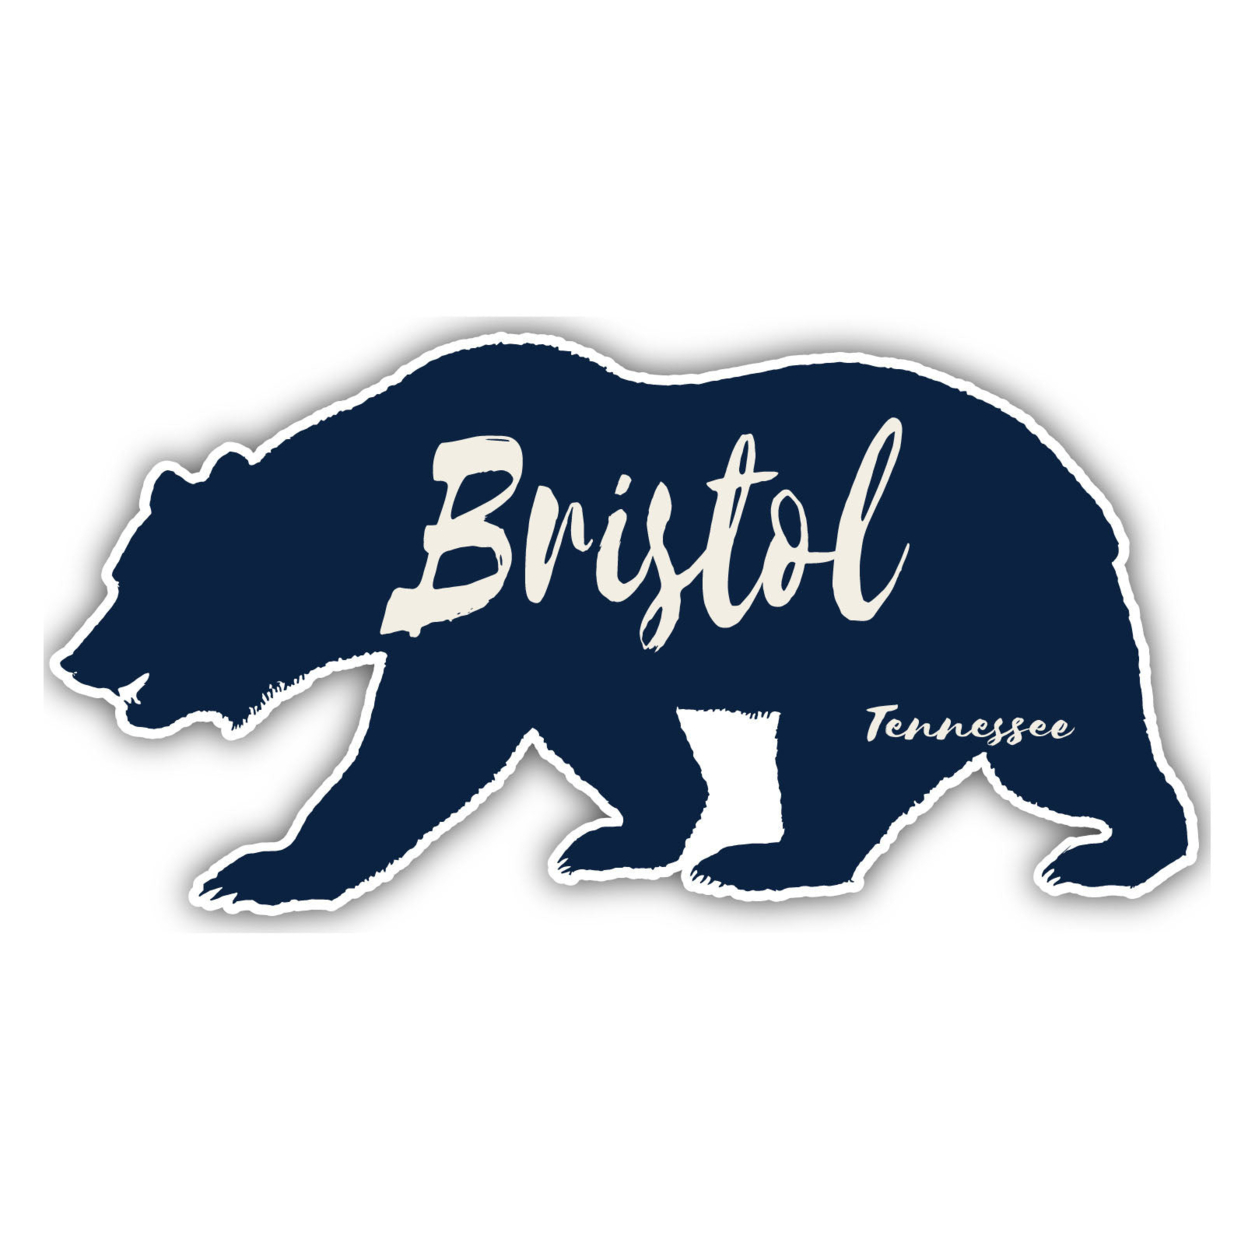 Bristol Tennessee Souvenir Decorative Stickers (Choose Theme And Size) - 4-Pack, 12-Inch, Tent